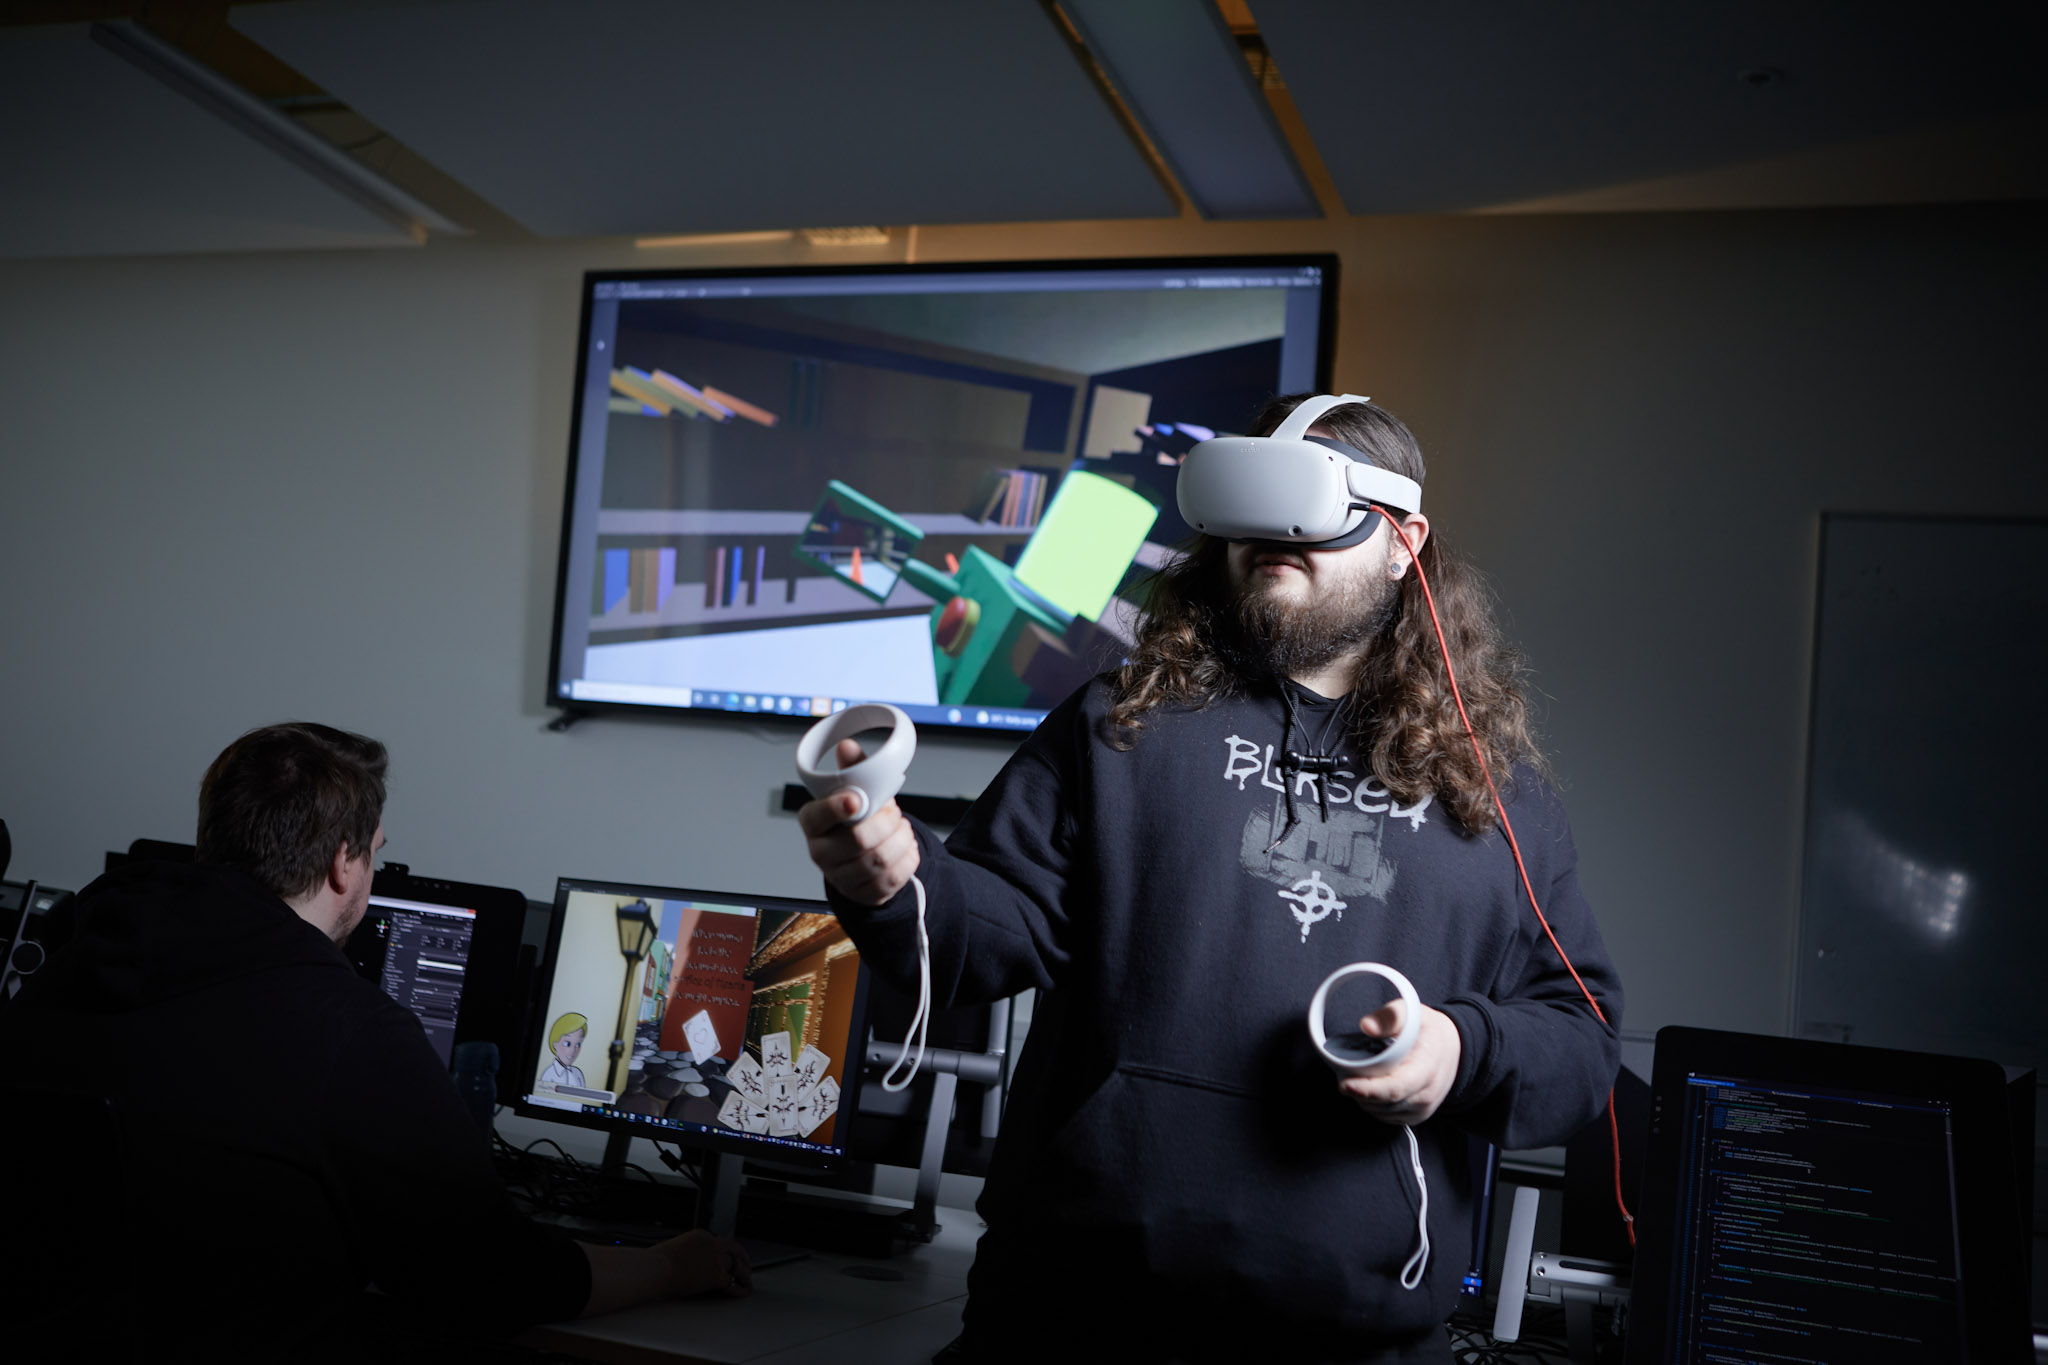 Photo shows students working with virtual reality software